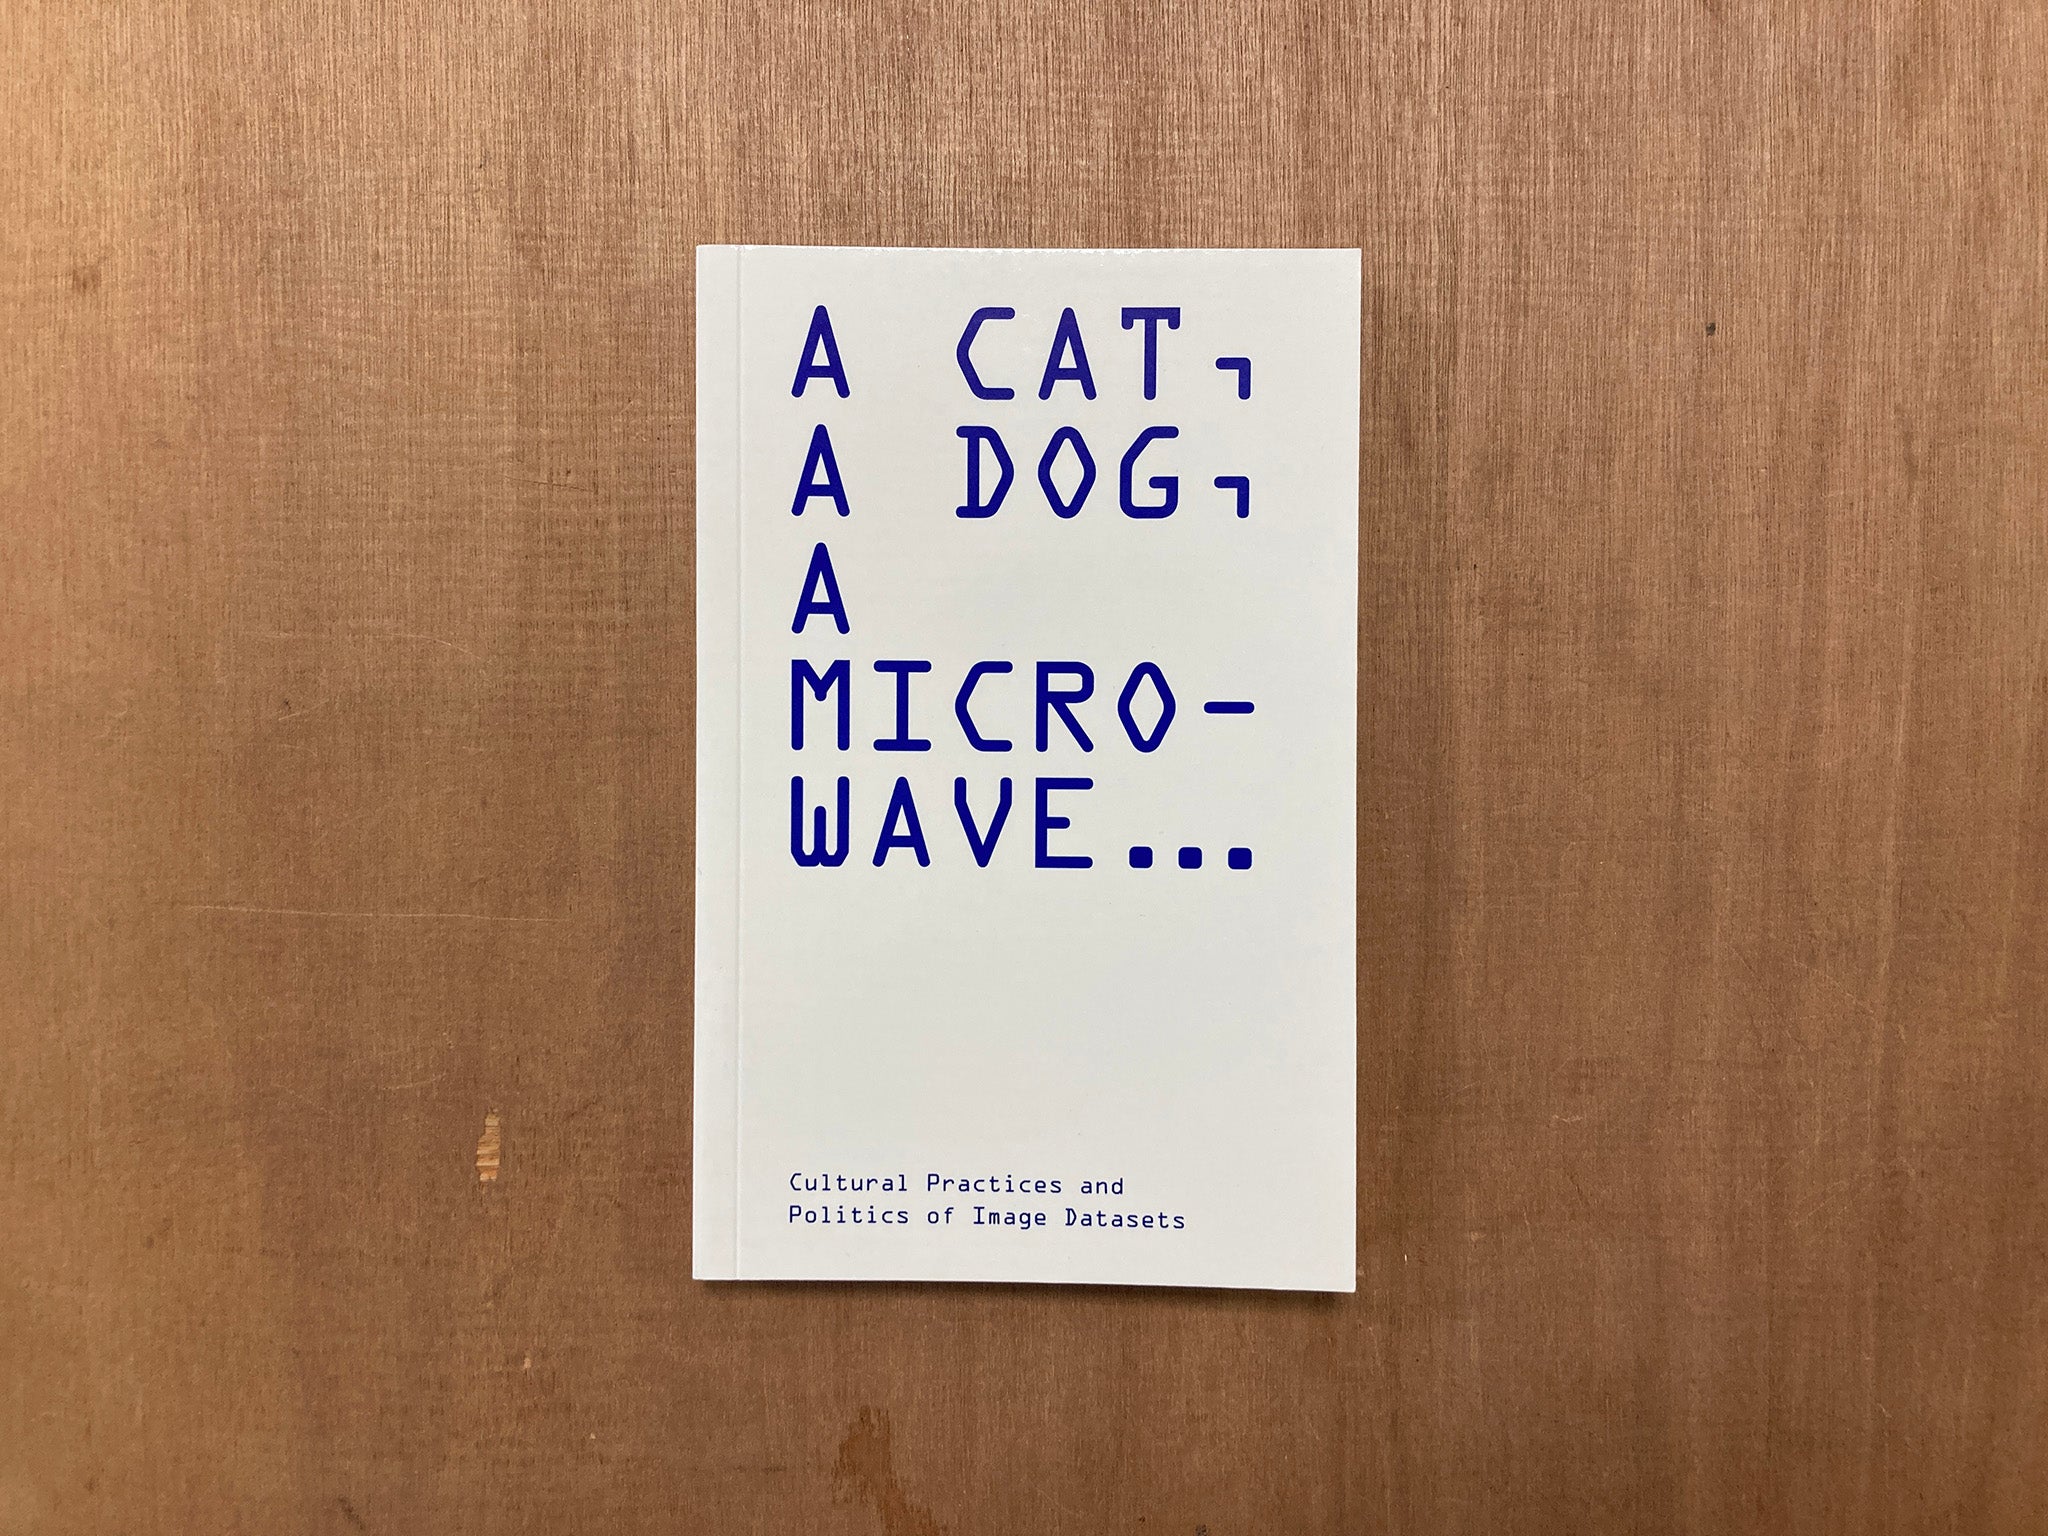 A CAT, A DOG, A MICROWAVE... CULTURAL PRACTICES AND POLITICS OF IMAGE DATASETS edited by Edited by Nicolas Malevé & Ioanna Zouli